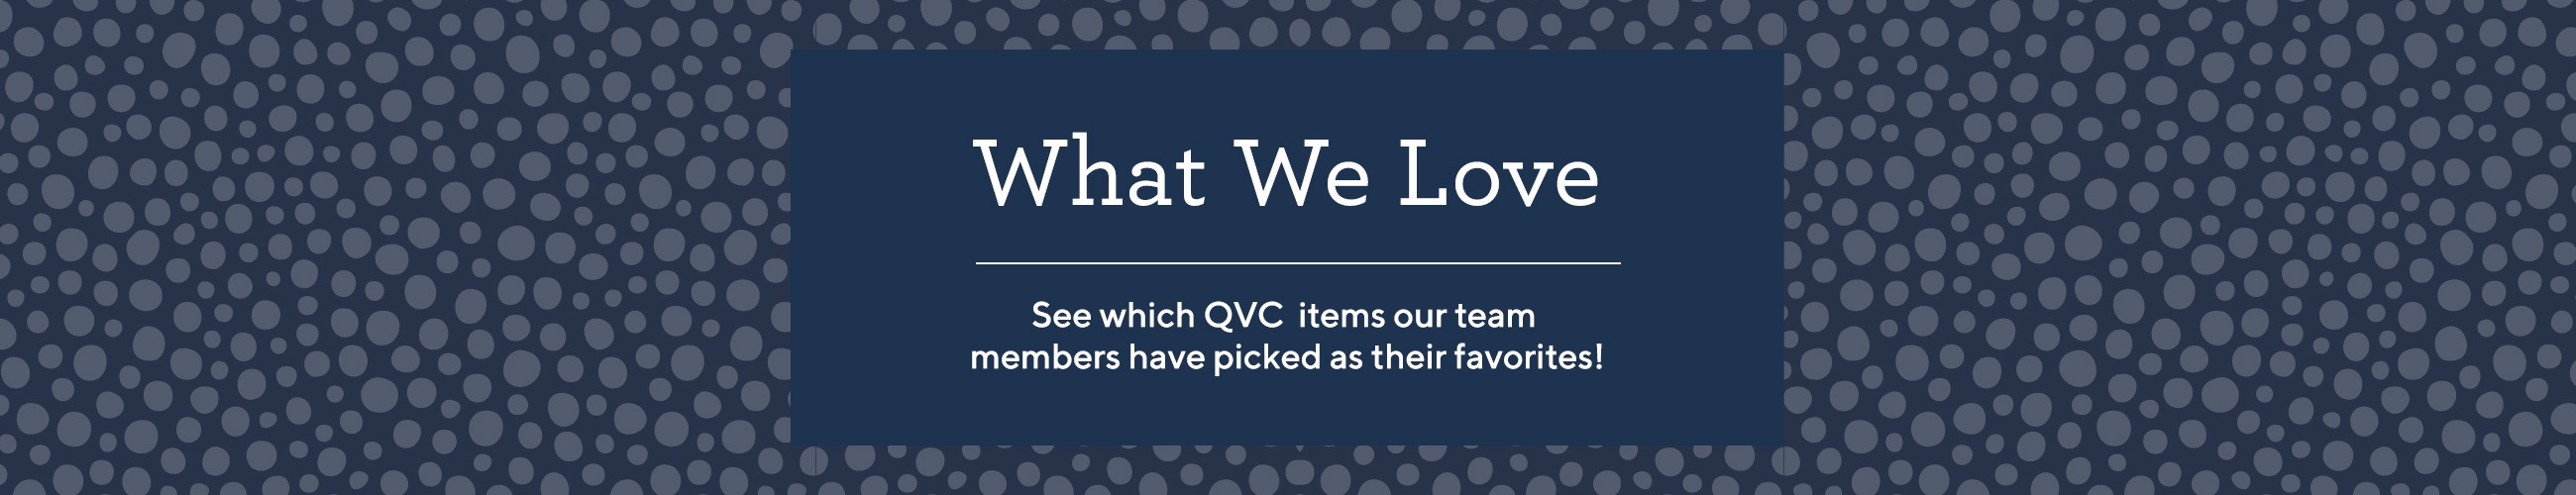 What We Love. See which QVC items our team members have picked as their favorites!